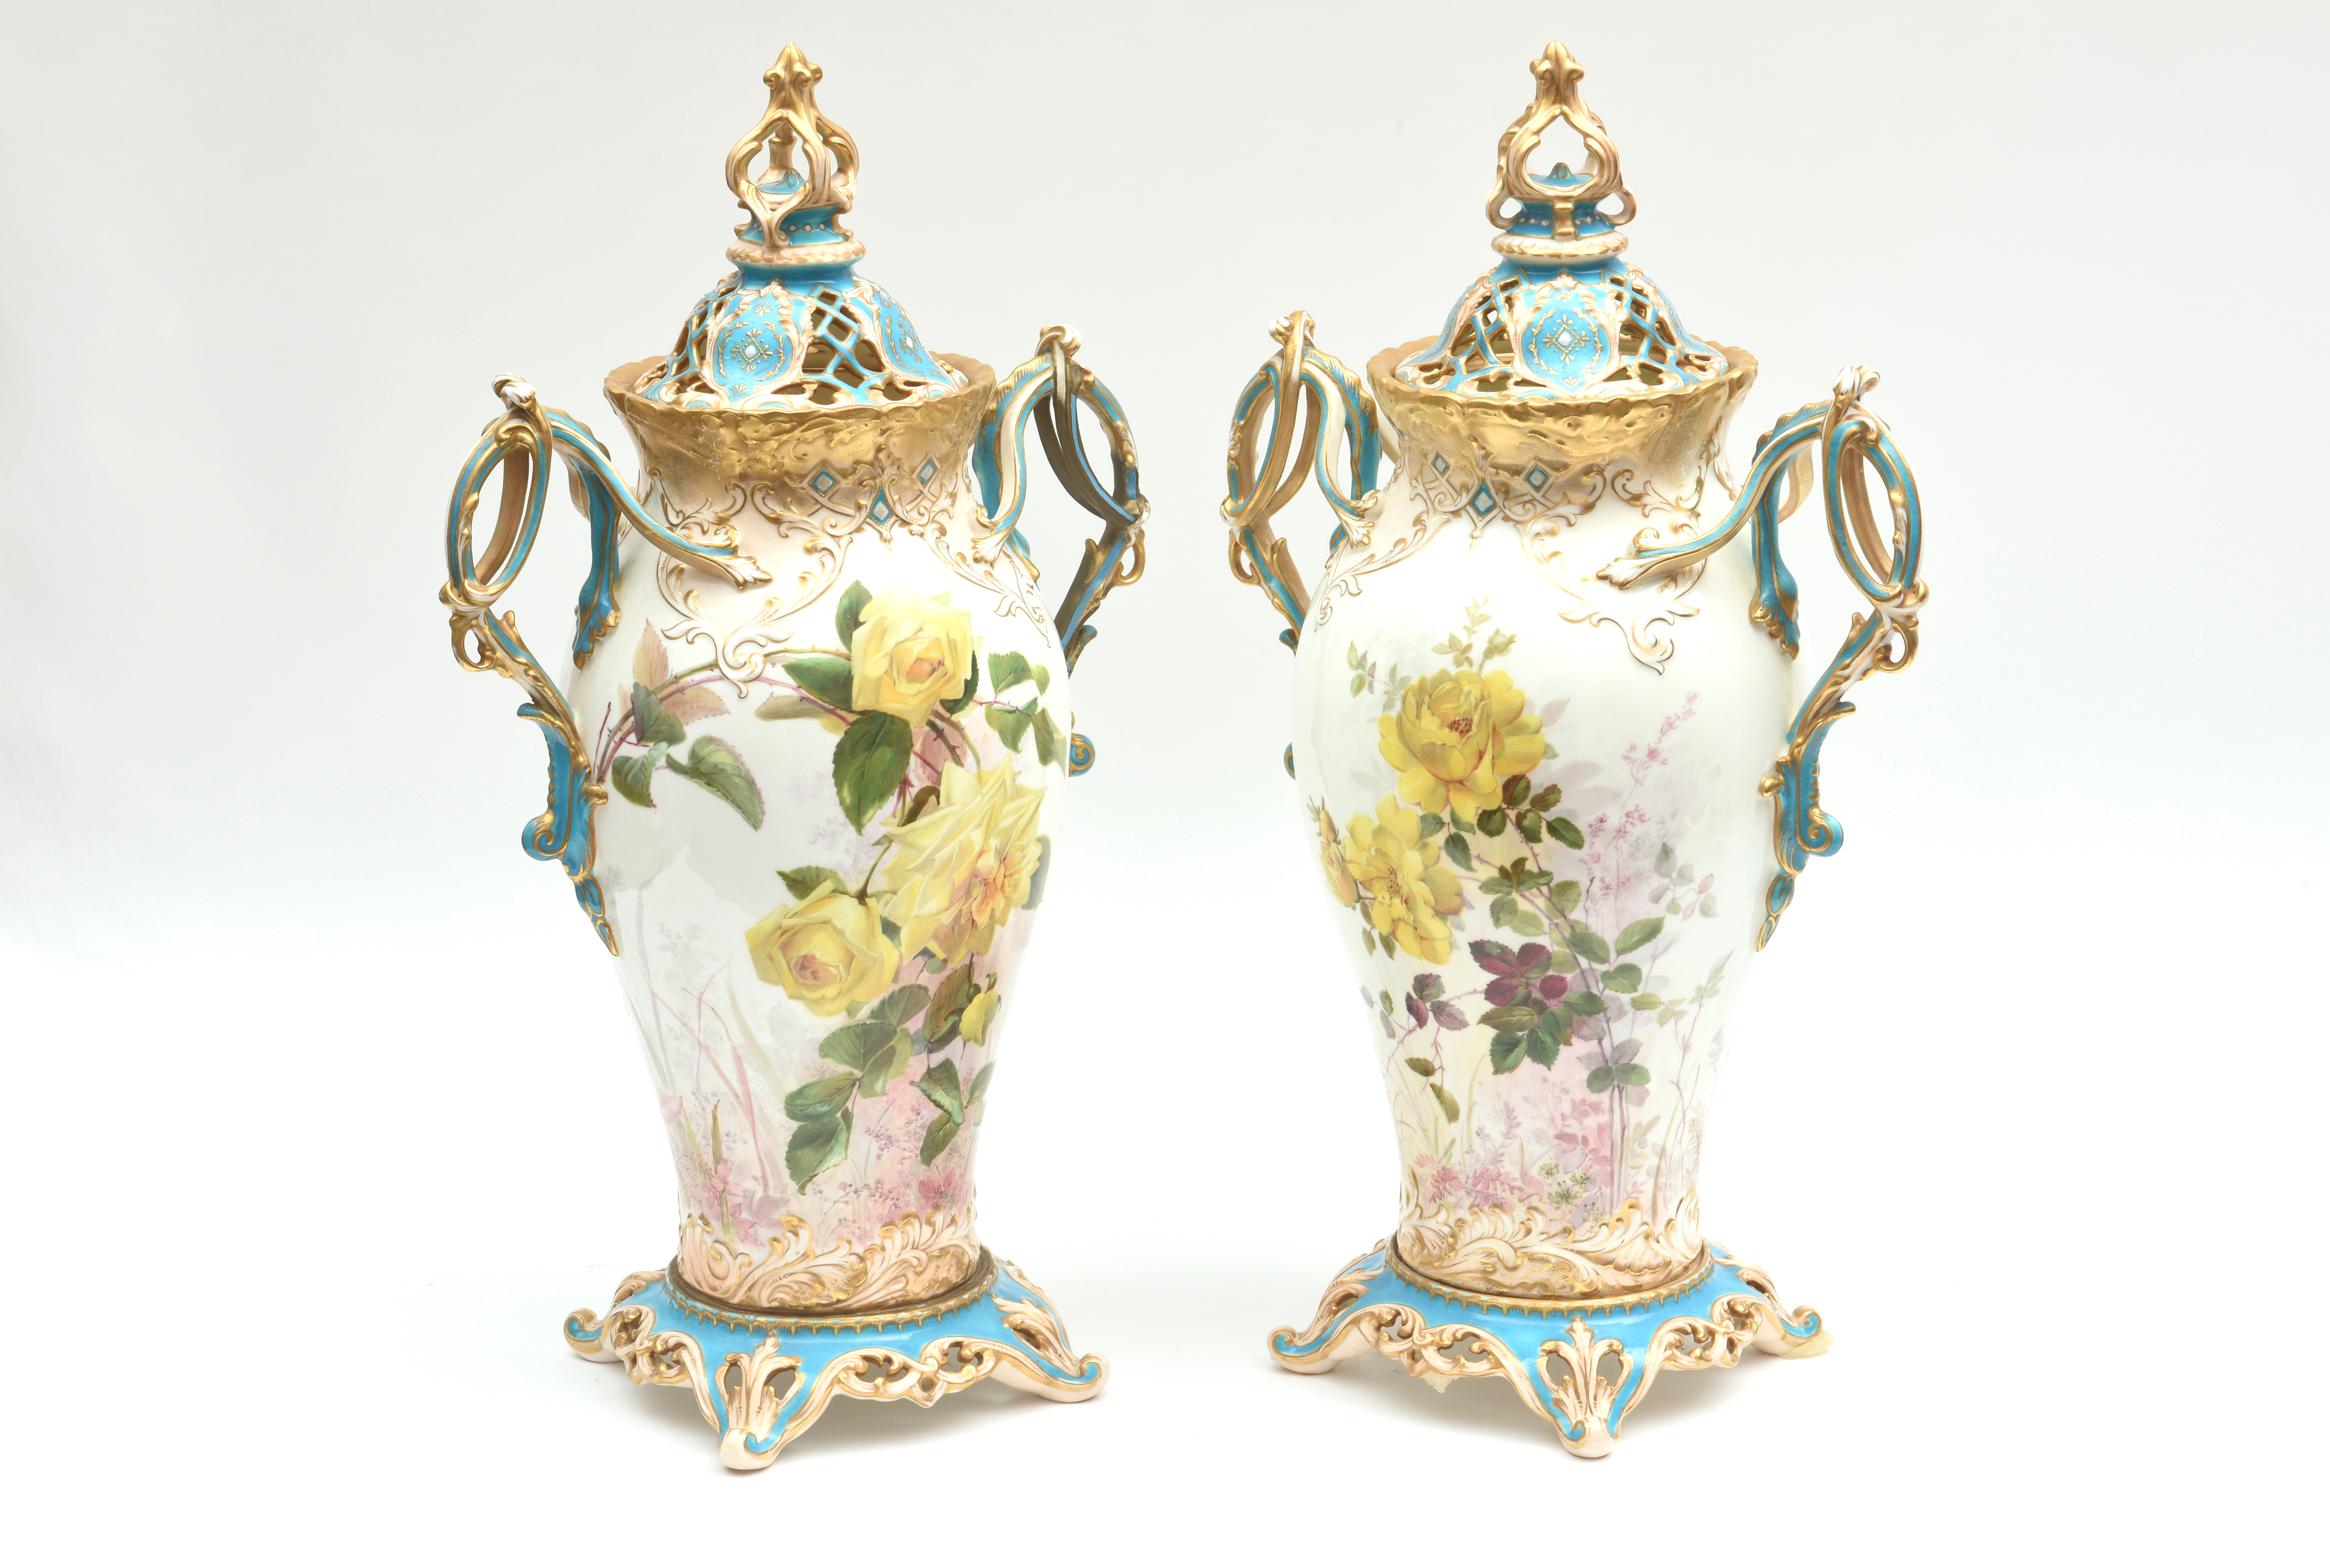 Hand-Painted 19th Century English Covered Vases, Vibrant Turquoise, Exquisitely Crafted, Pair